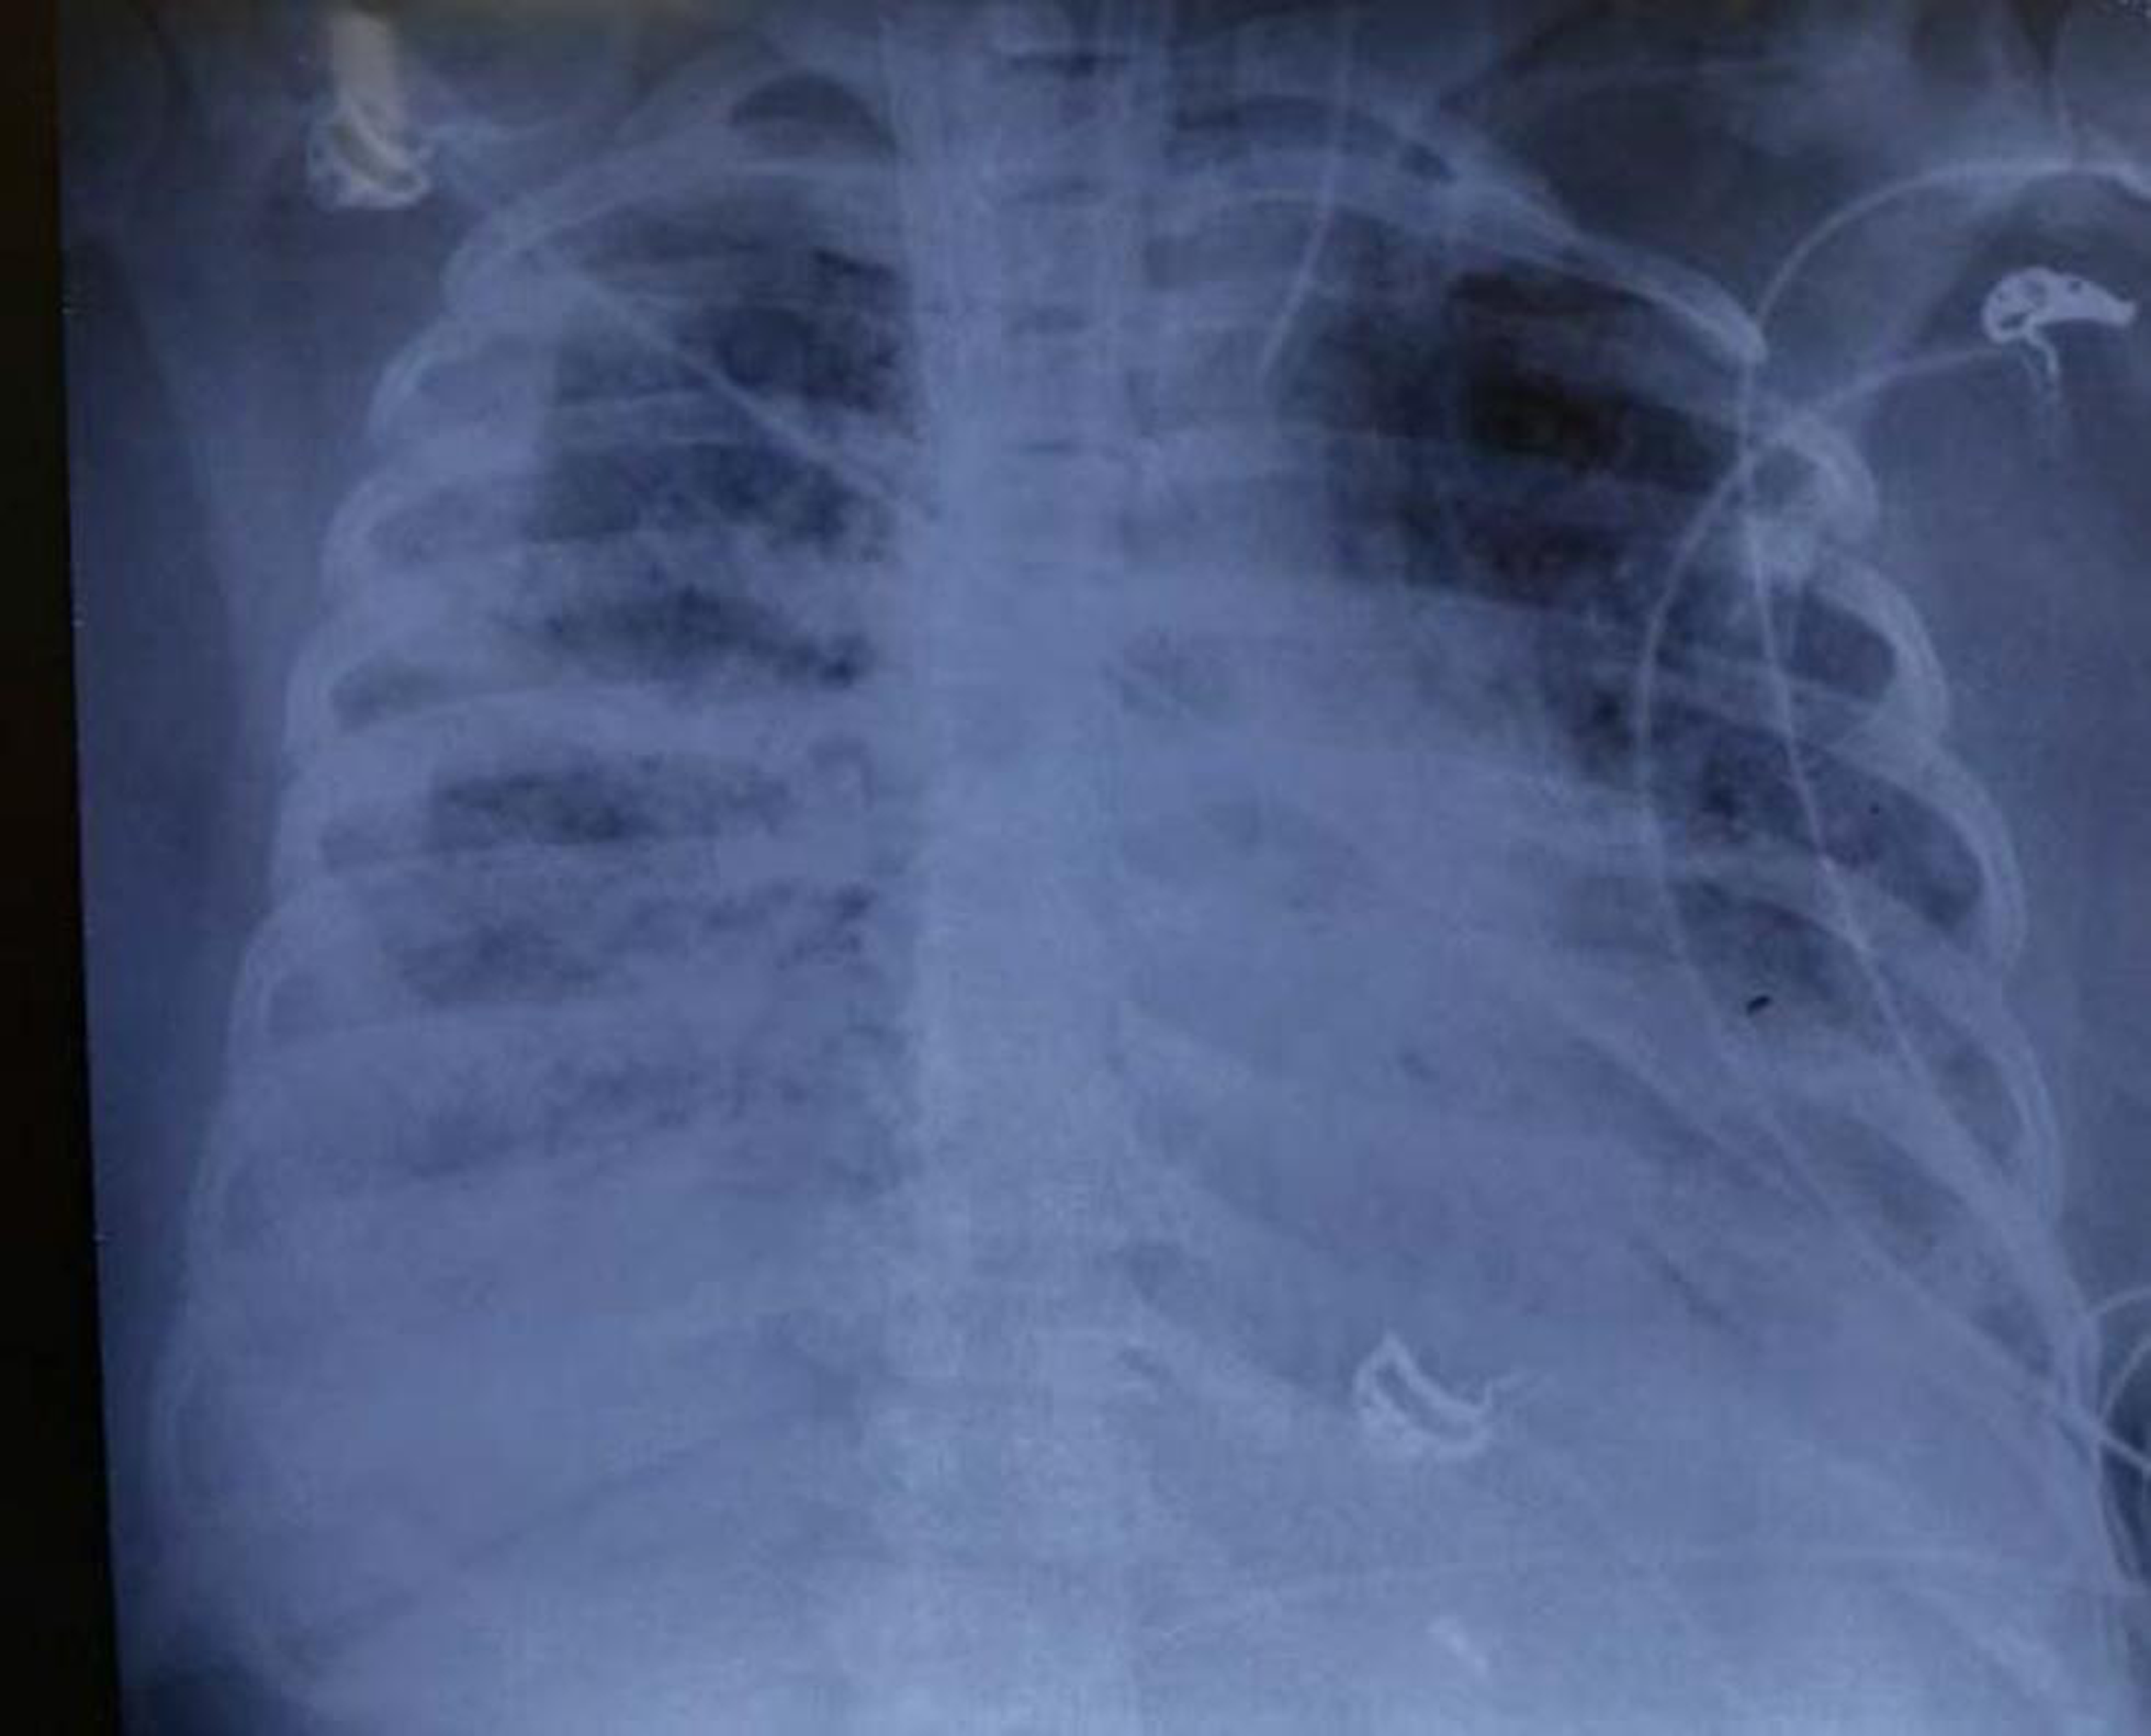 Chest X-ray on Day 33 extracorporeal membrane oxygenation—looking as if very little improvement in upper lobe of left lung parenchyma.